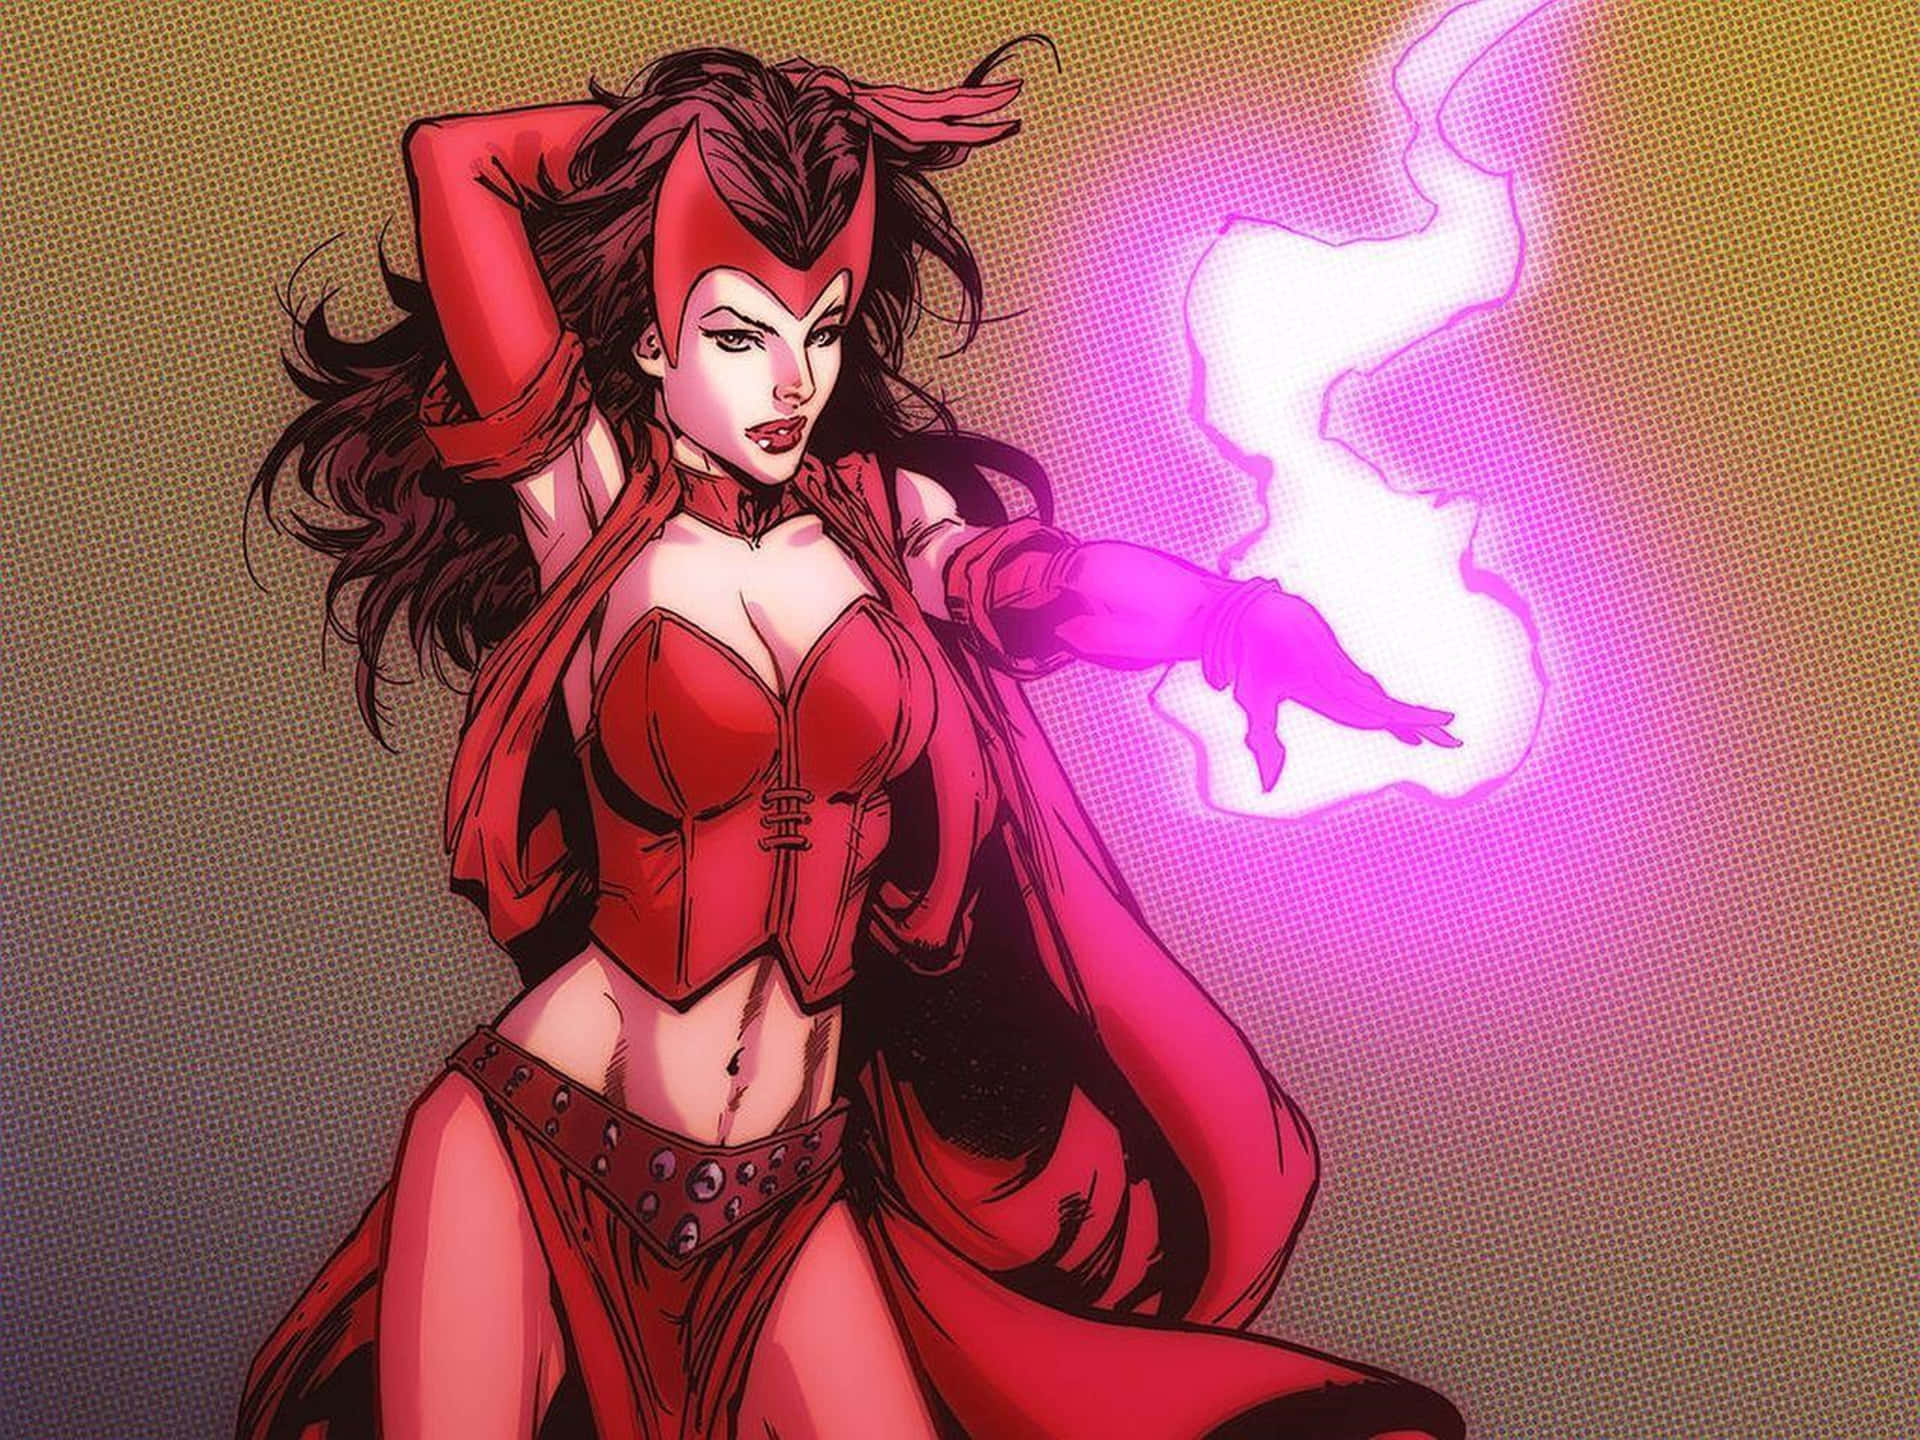 Scarlet Witch casts a spell of powerful magic Wallpaper